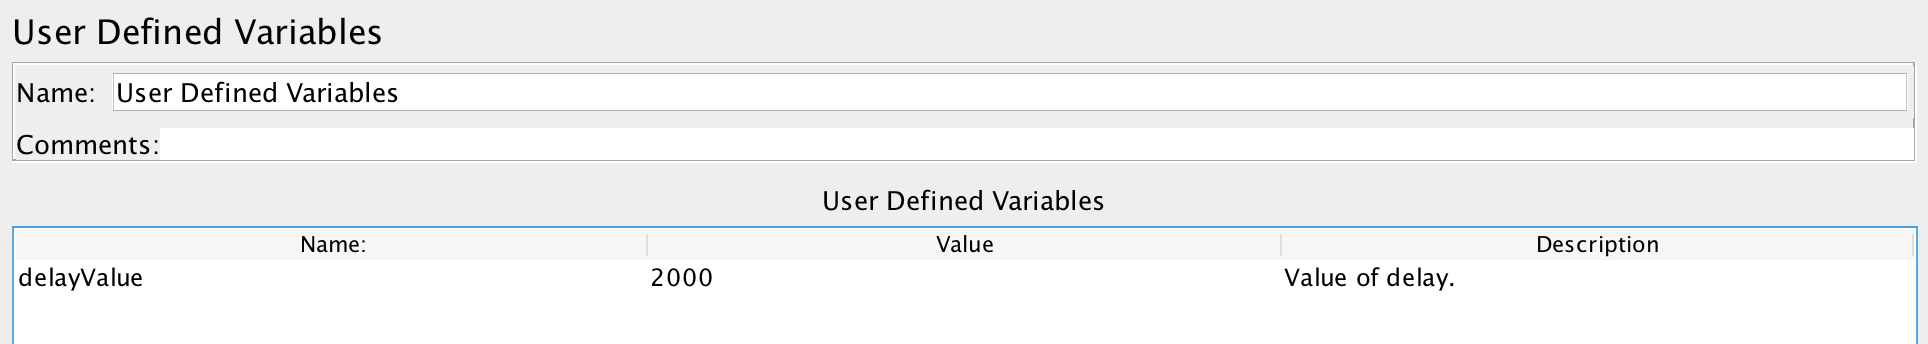 User Defined Variables